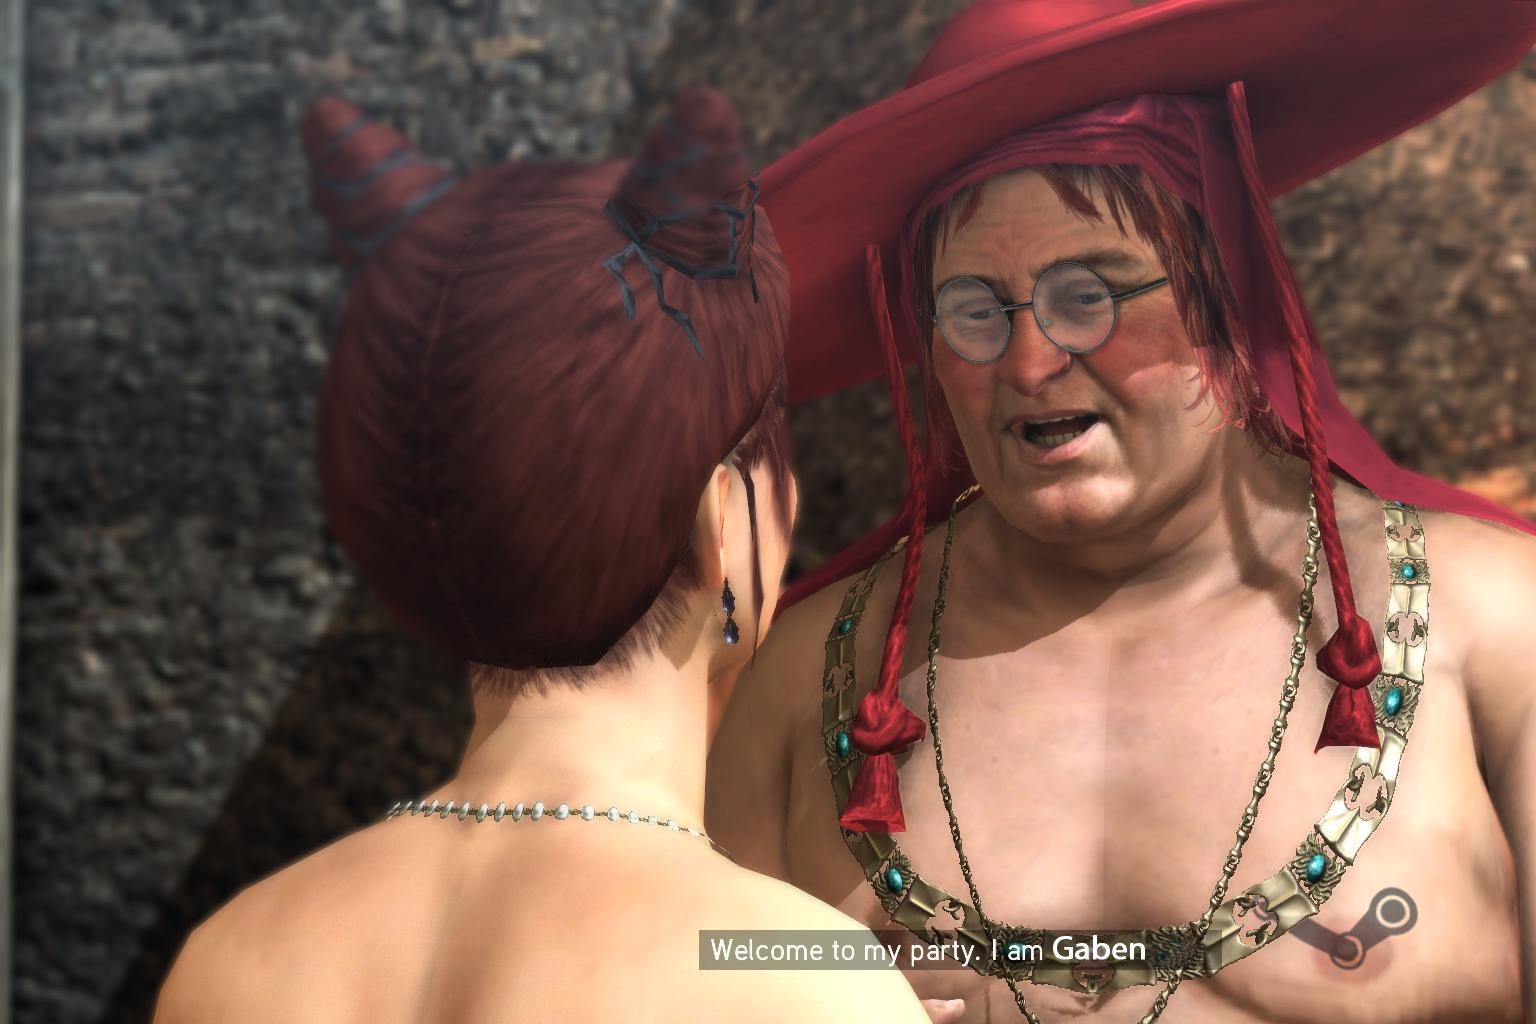 memes - welcome to my party i am gaben - Welcome to my party. I am Gaben